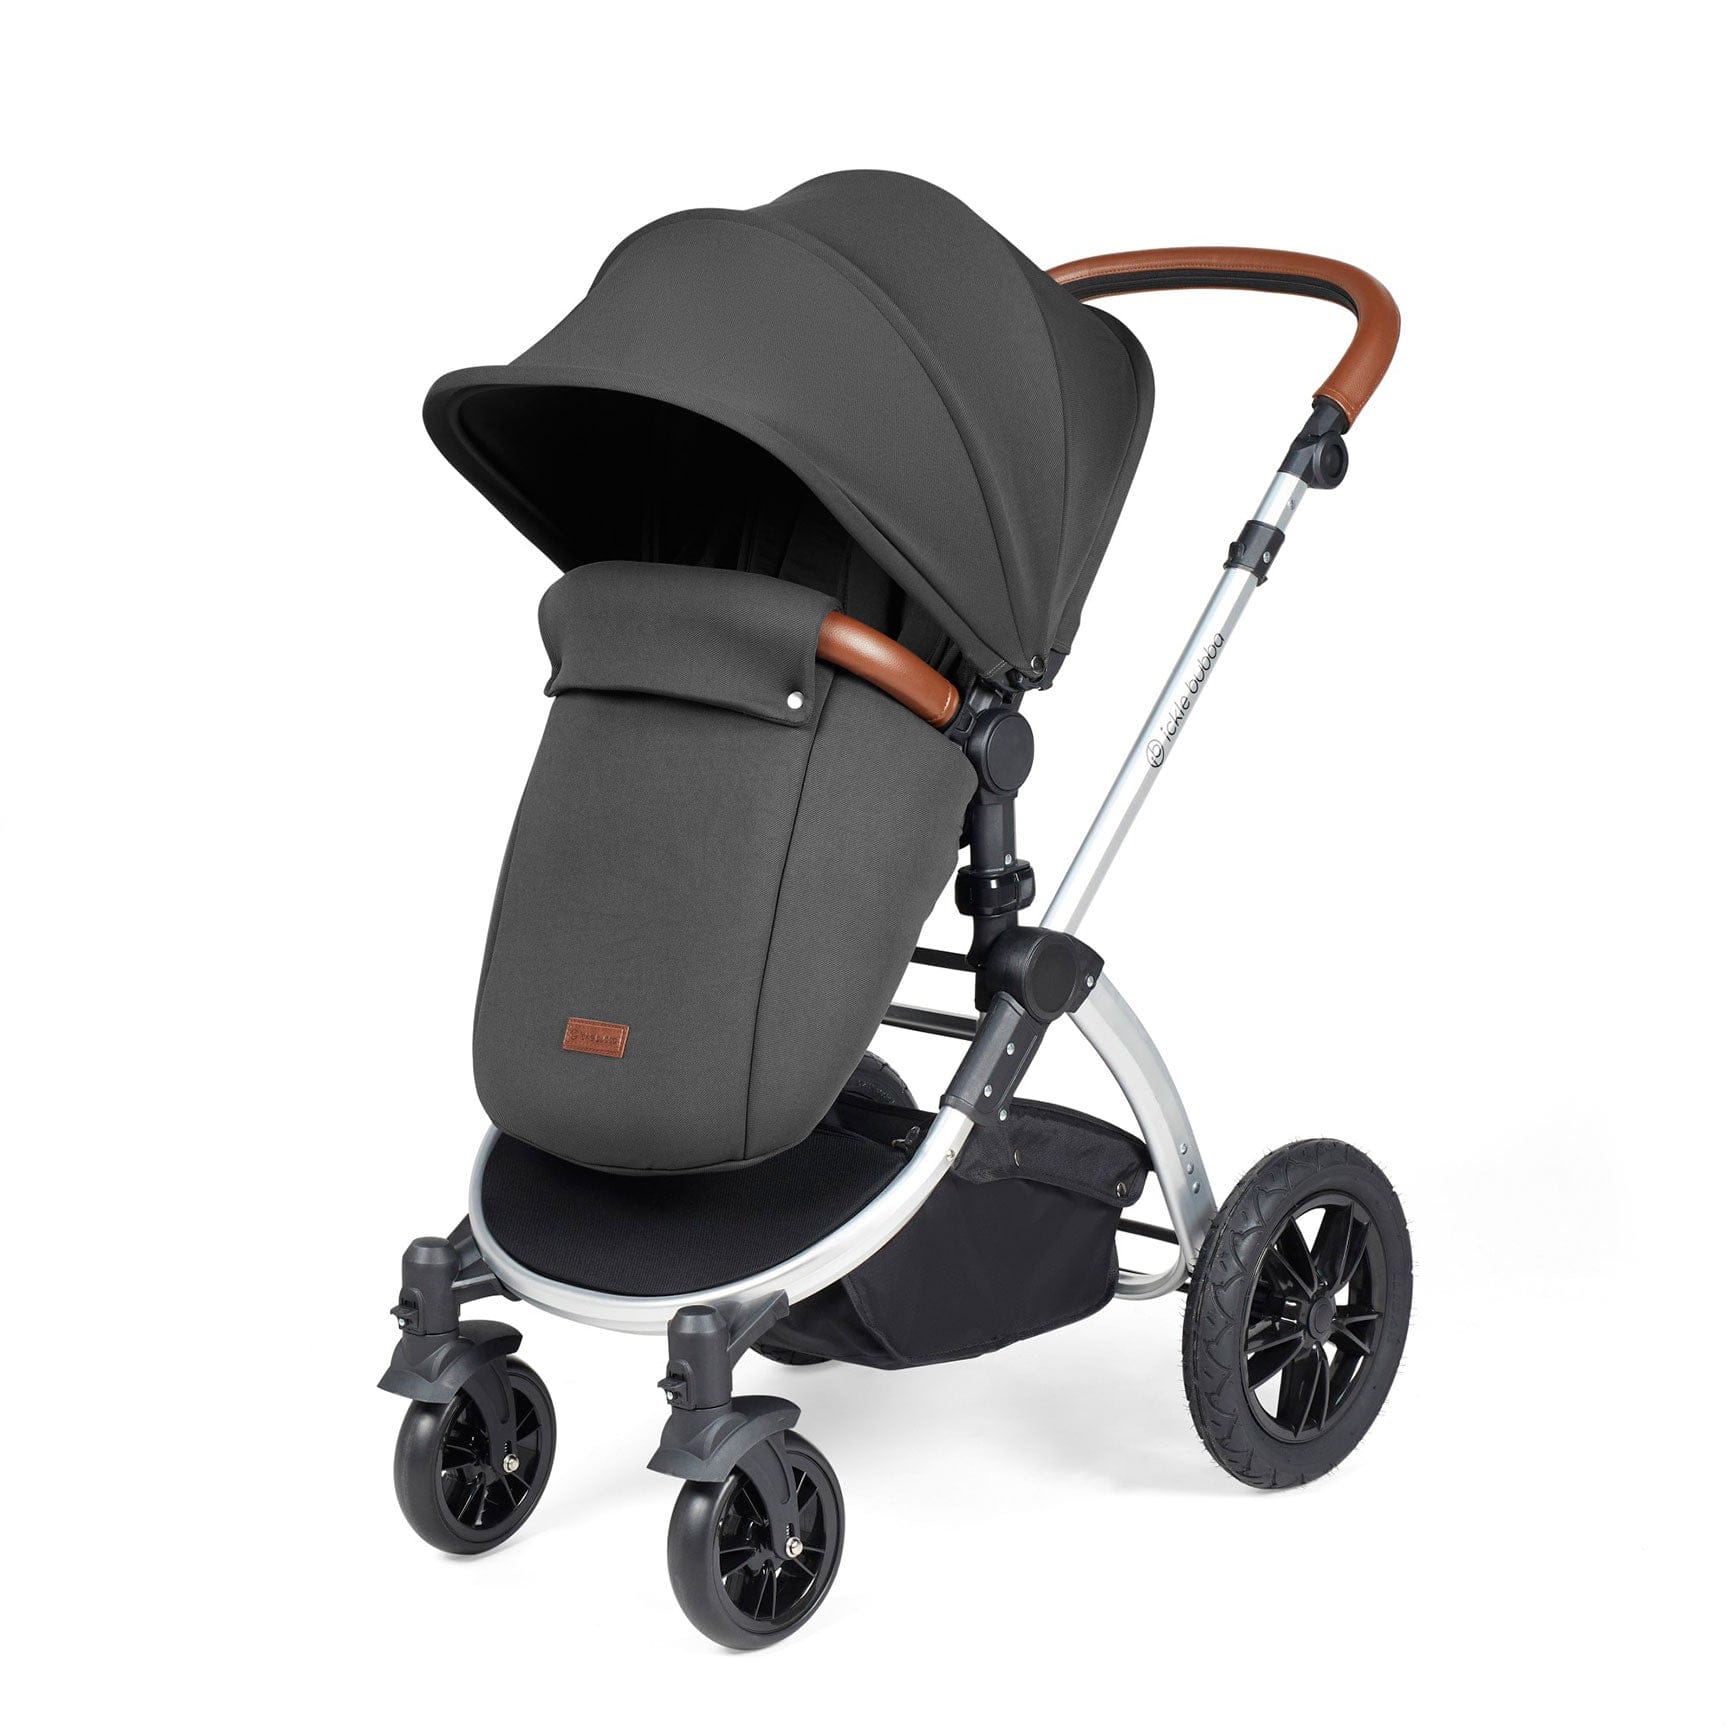 Ickle Bubba Stomp Luxe All-in-One Travel System with Isofix Base in Silver/Charcoal Grey/Tan Travel Systems 10-011-300-255 5056515026542